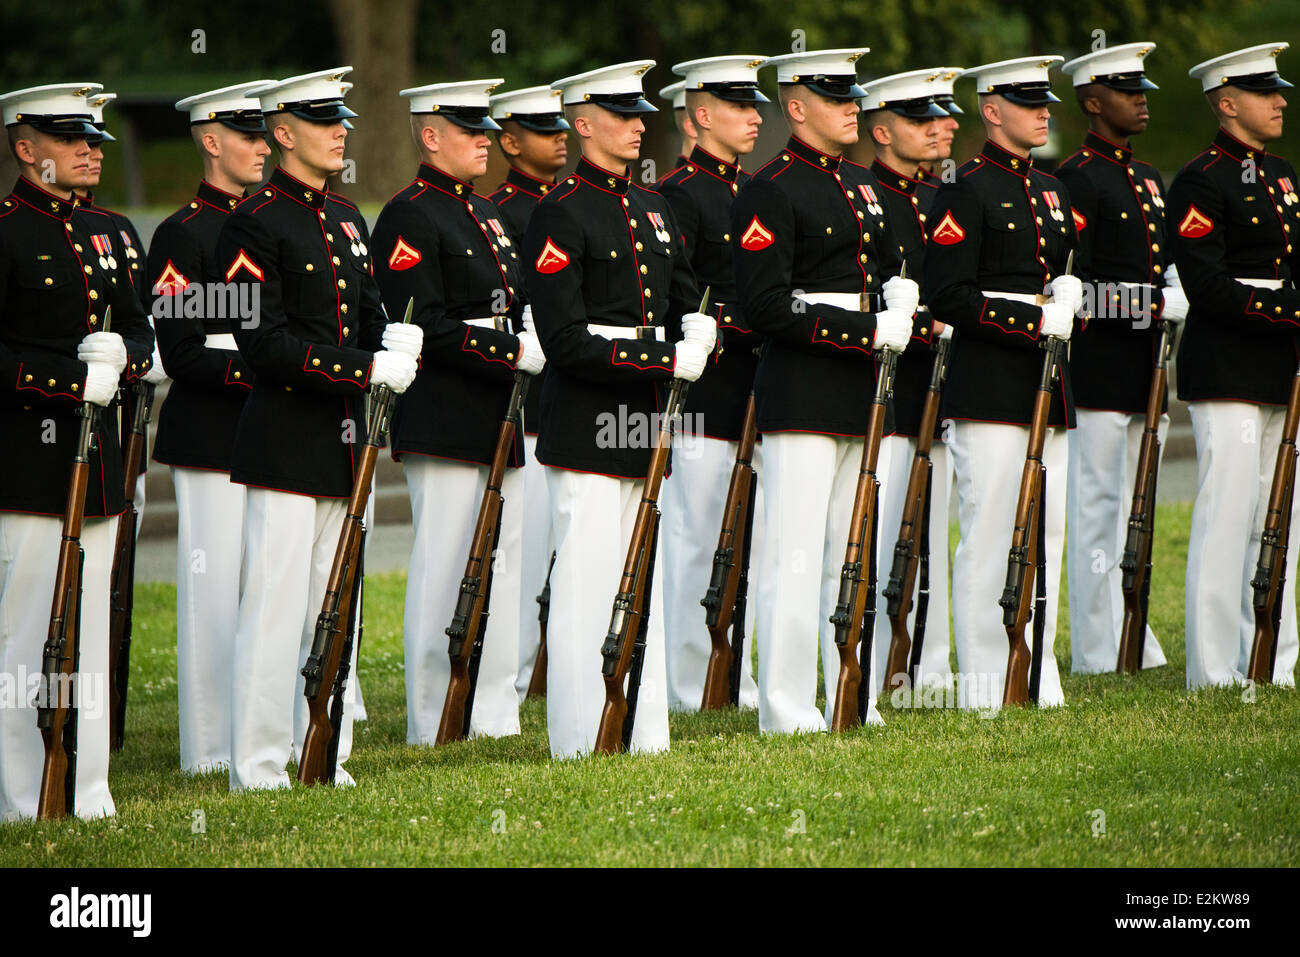 The US Marine Corps Silent Drill Platoon performs their drills during the Sunset Parade at the Iwo Jima Memorial in Arlington, Virginia. Stock Photo